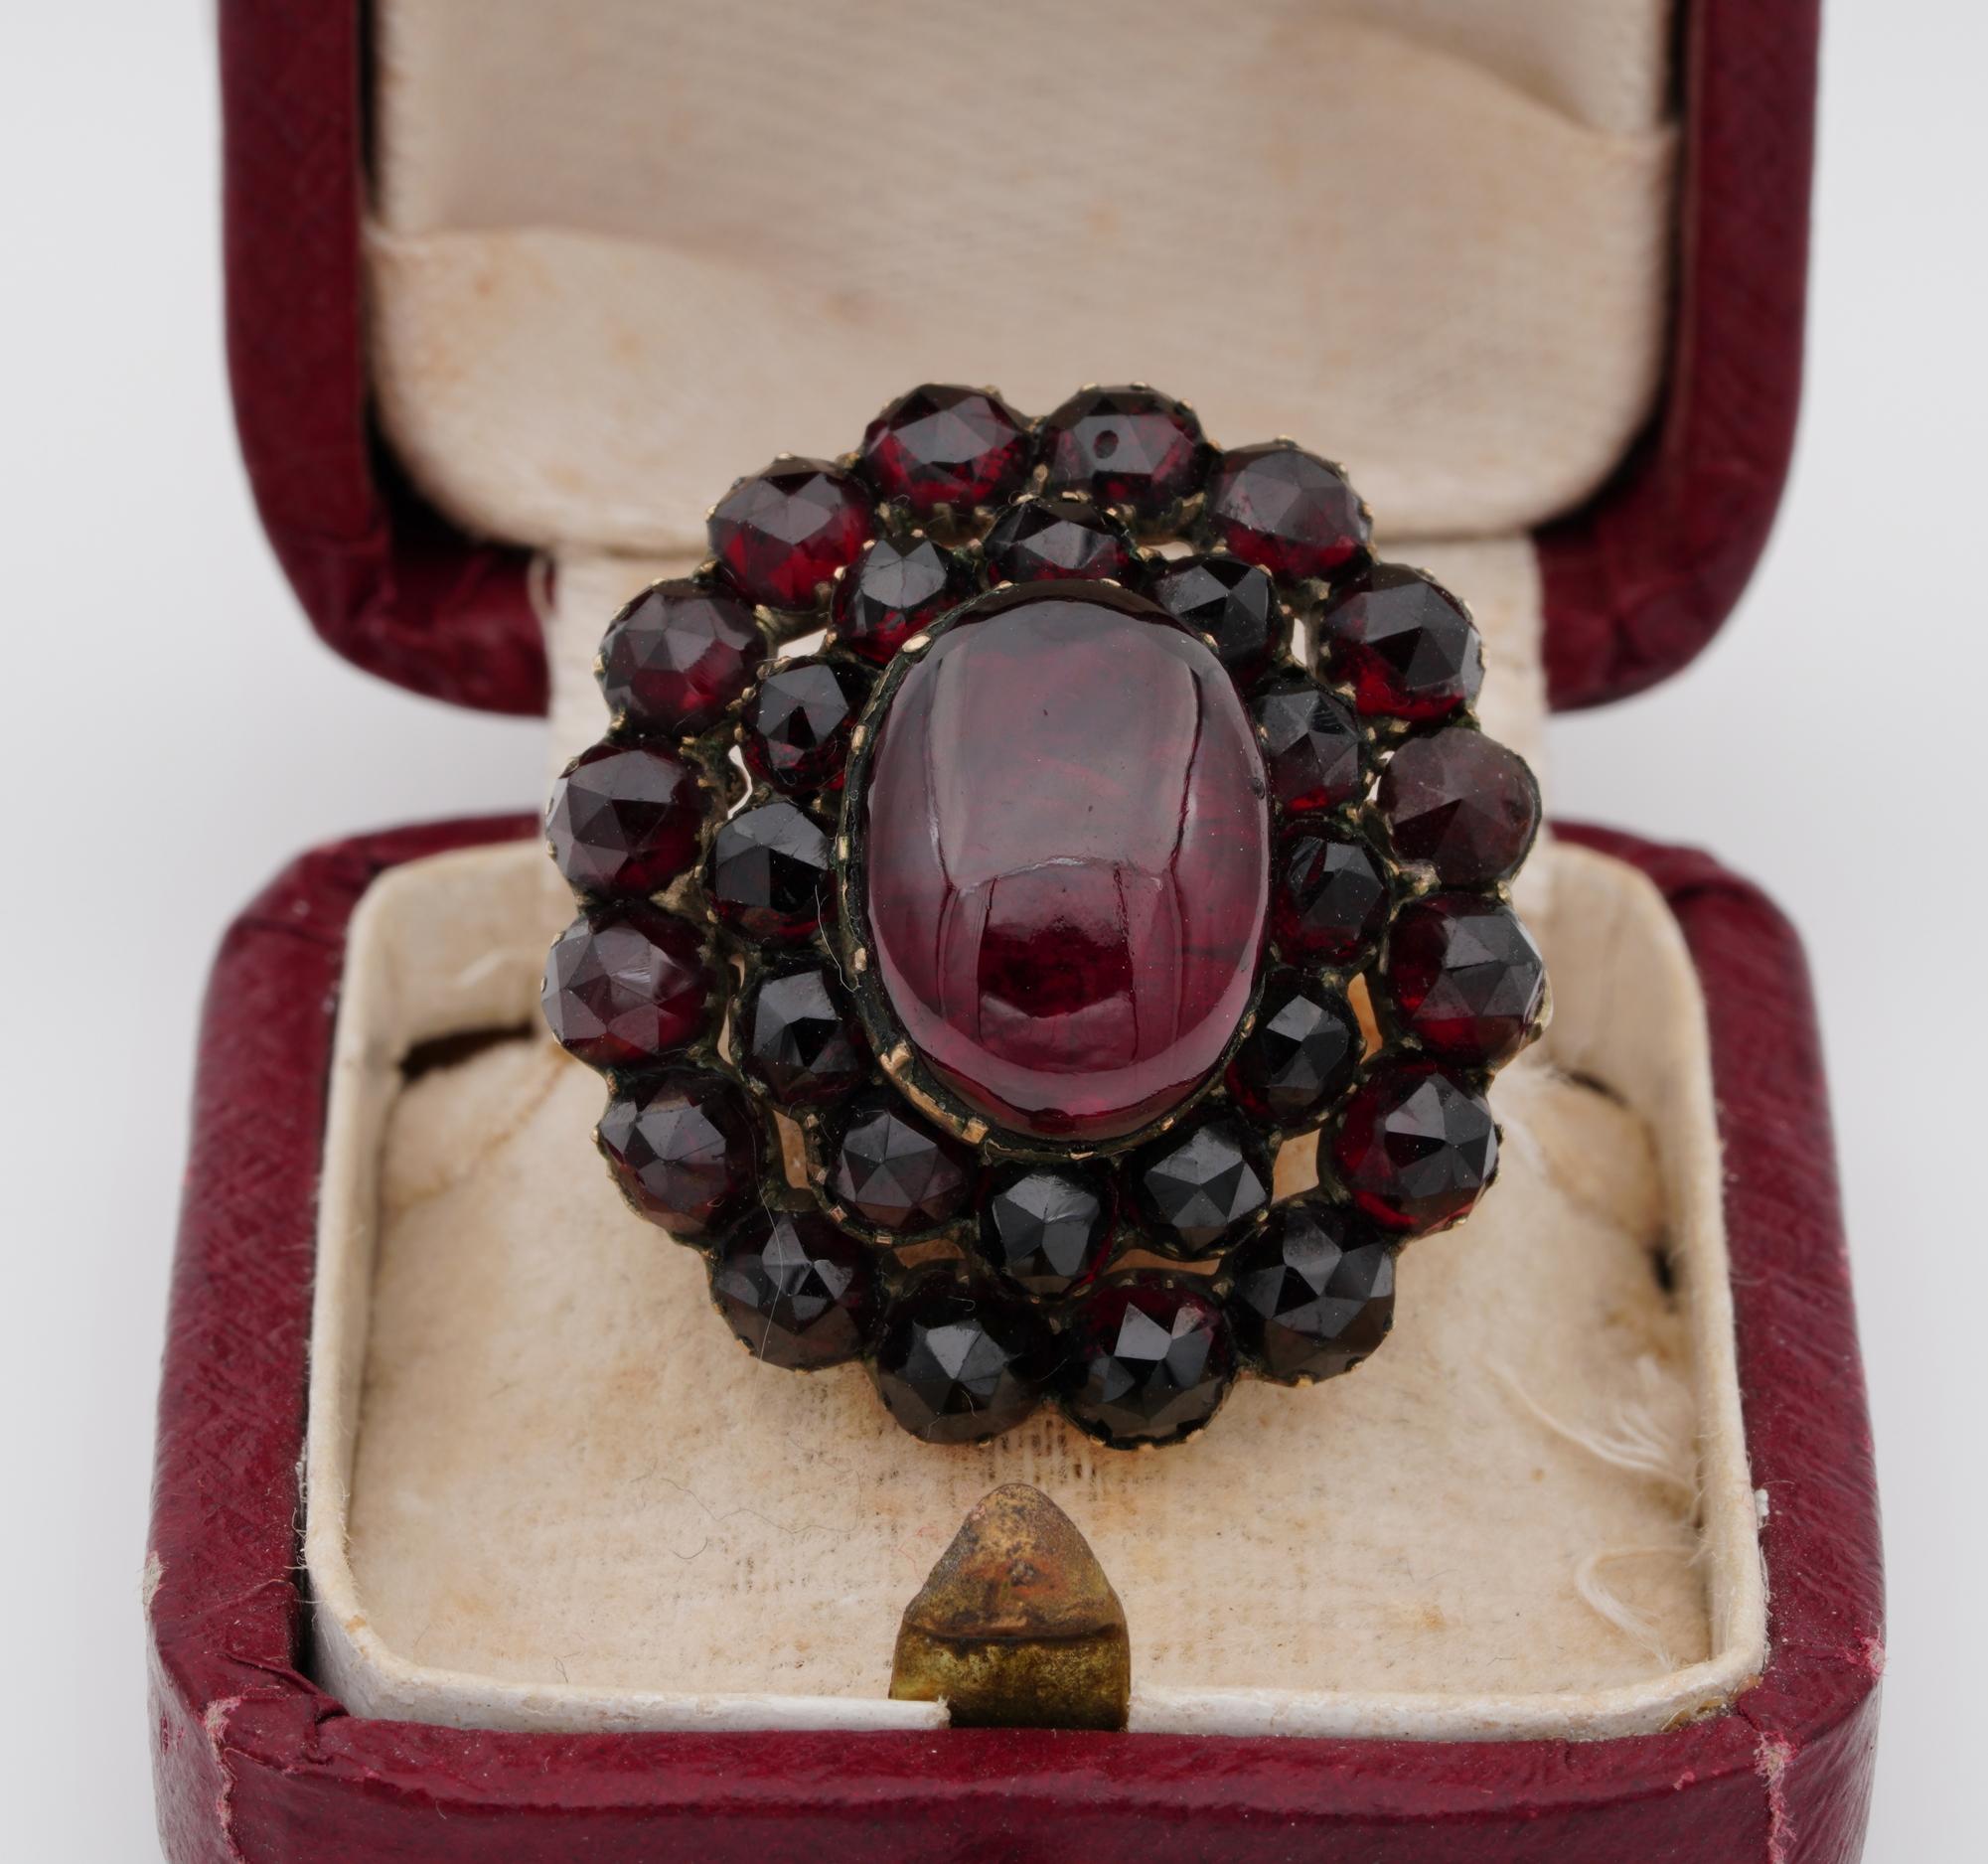 Victorian Statements!

An impressive, large, imposing oval head, Victorian Bohemian Garnet ring
Statement piece for the antique Garnets lovers, large, eye-catching, rare
Hand crafted of solid gold slight down 18Kt, tested
Utterly beautiful, large